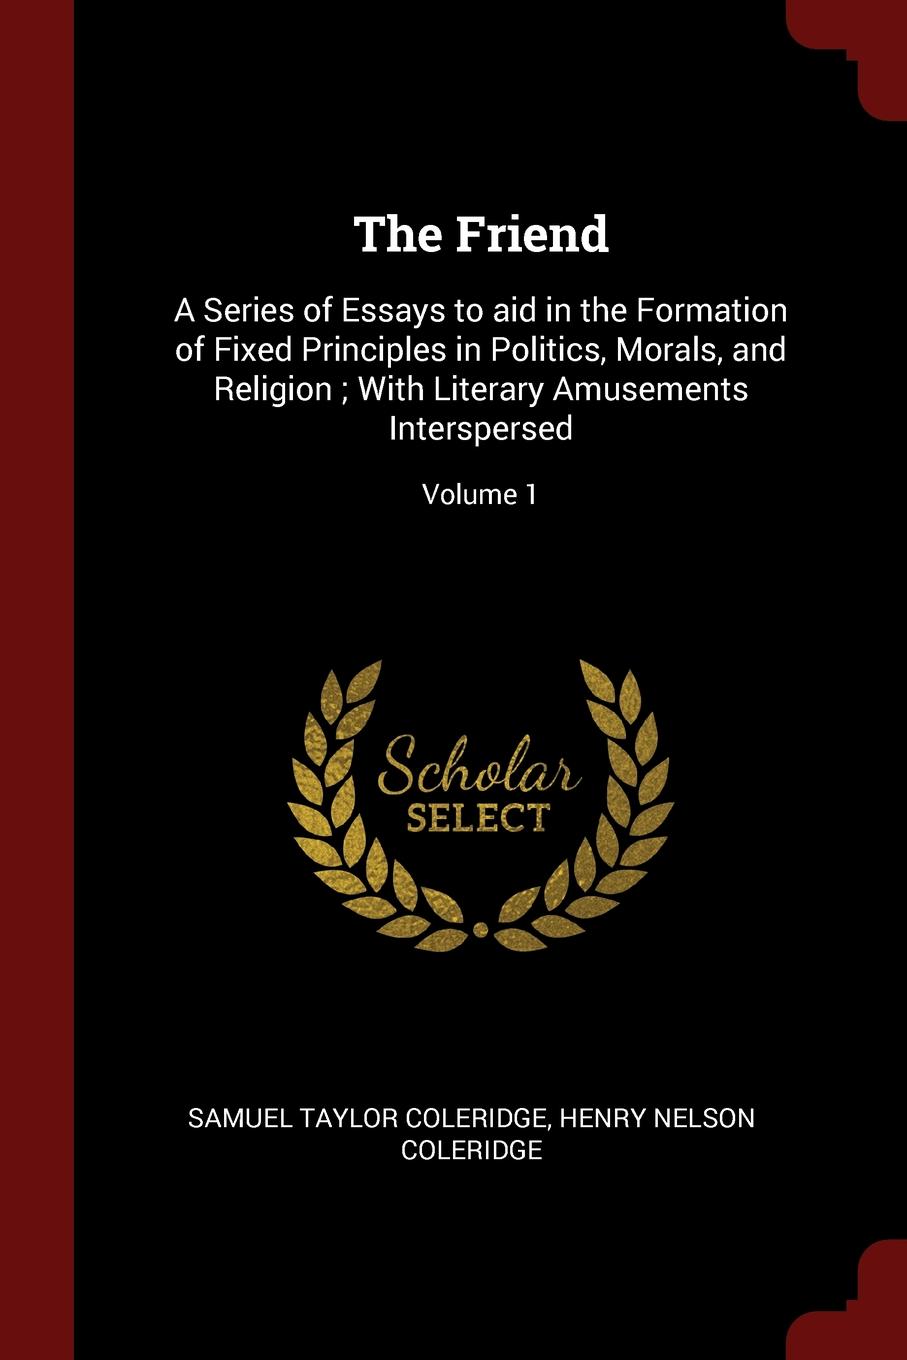 The Friend. A Series of Essays to aid in the Formation of Fixed Principles in Politics, Morals, and Religion ; With Literary Amusements Interspersed; Volume 1